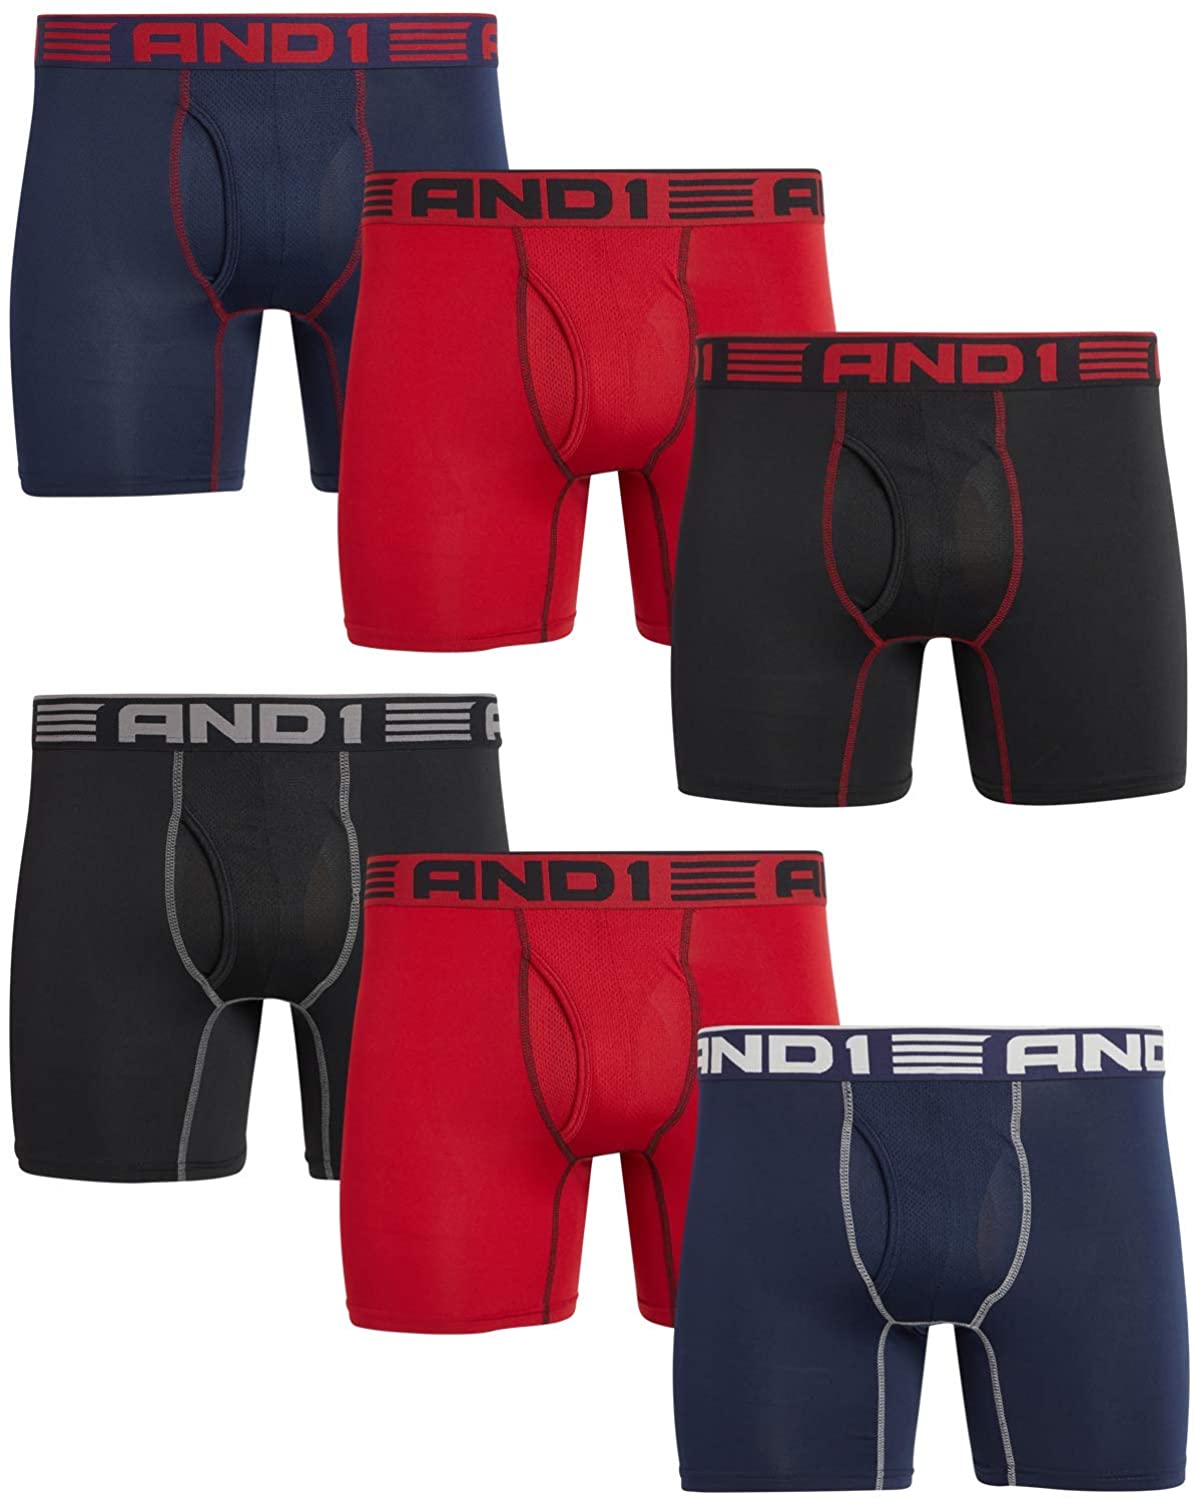 AND1 Men's Underwear 4 or 5 Pack Performance Compression Boxer Briefs with Functional Fly